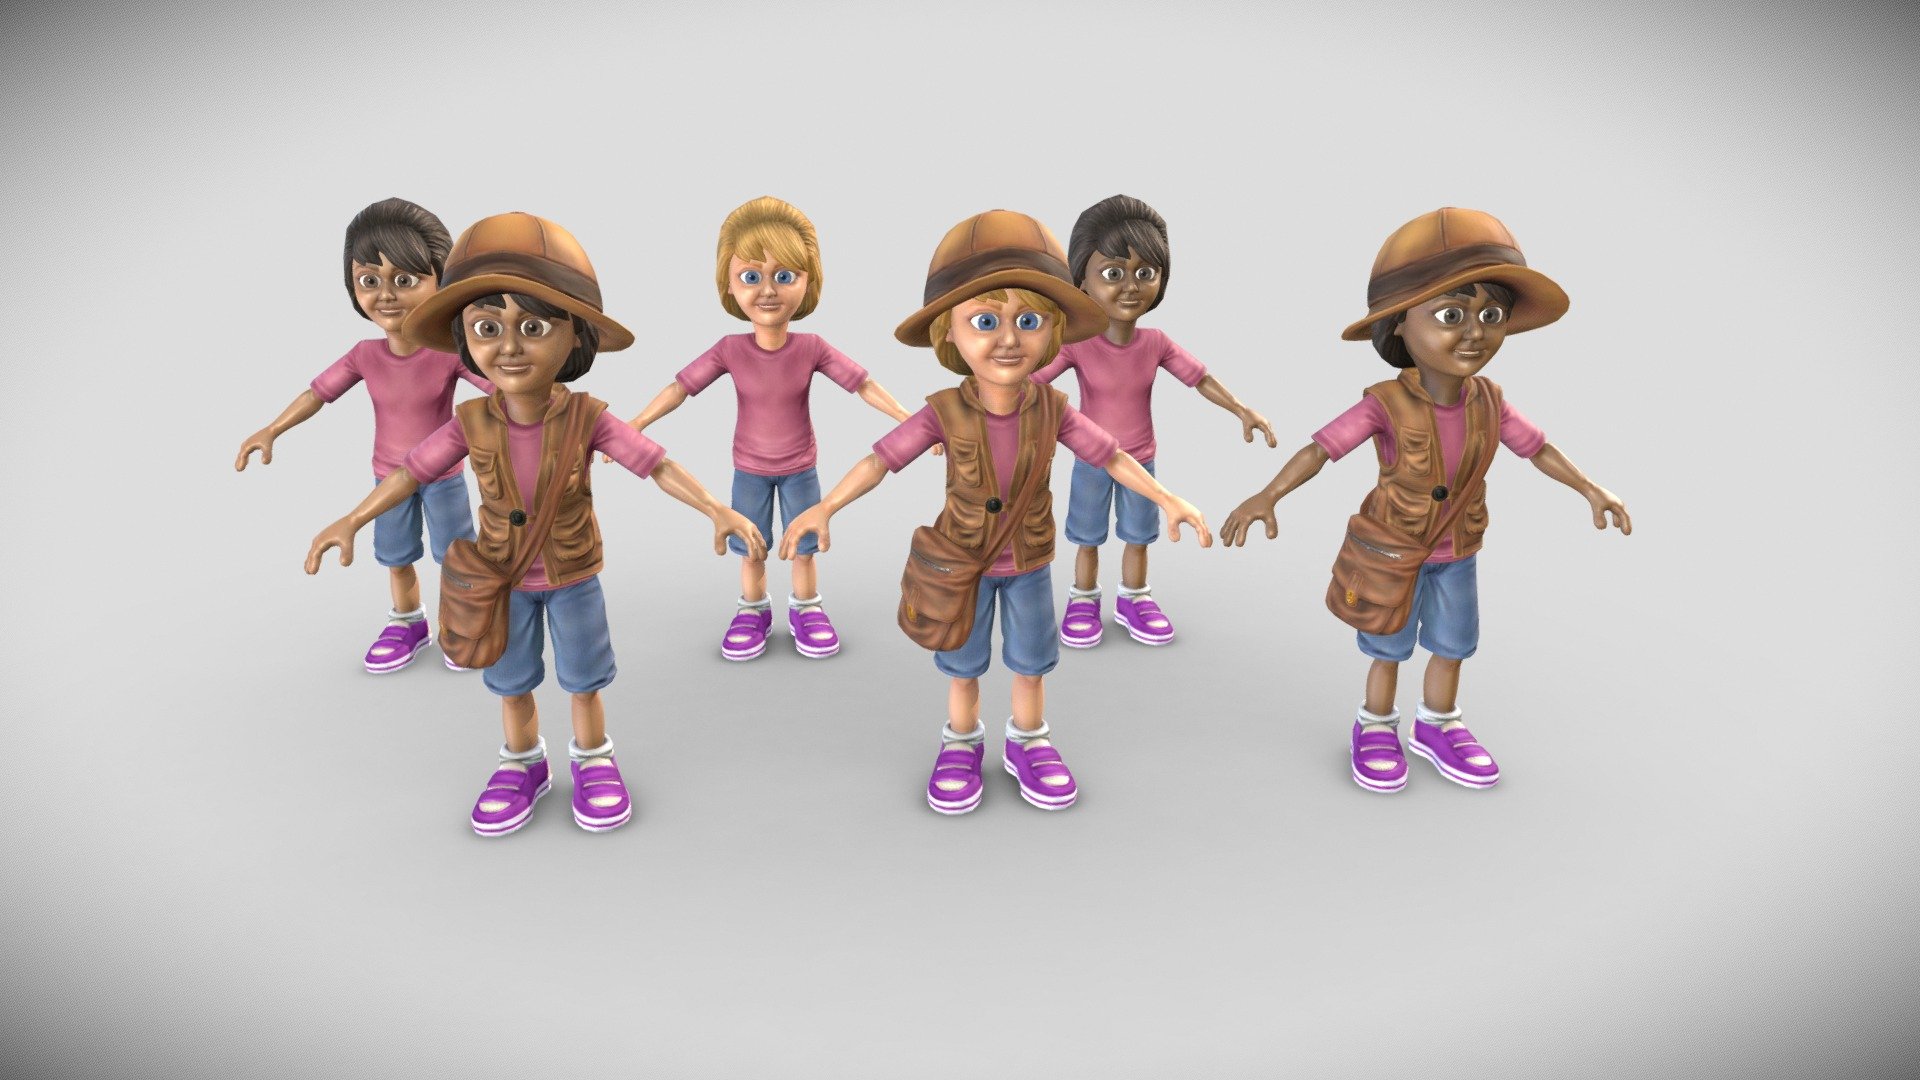 A child (Girl) model dressed for exploring. White, Latina, and Black versions included.

Color, Specular/Gloss, Occlusion, and Normal maps are 4096.

Collada, FBX, and OBJ formats included 3d model